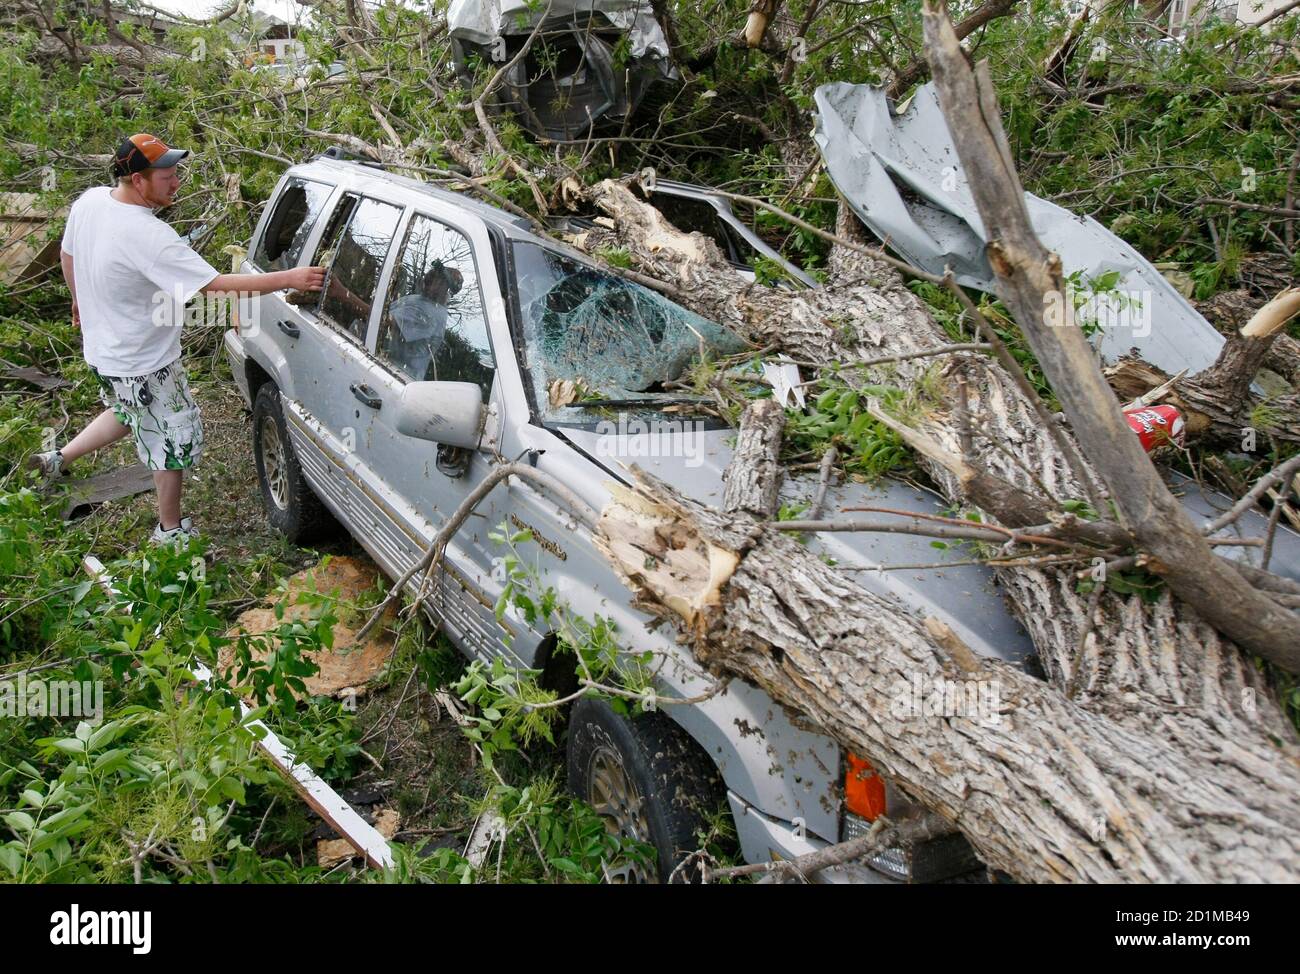 Robert Dilka looks at his father-in-law's car smashed by a tornado in Windsor, Colorado May 22, 2008. Several tornados touched down in the area around lunchtime.  REUTERS/Rick Wilking (UNITED STATES) Stock Photo